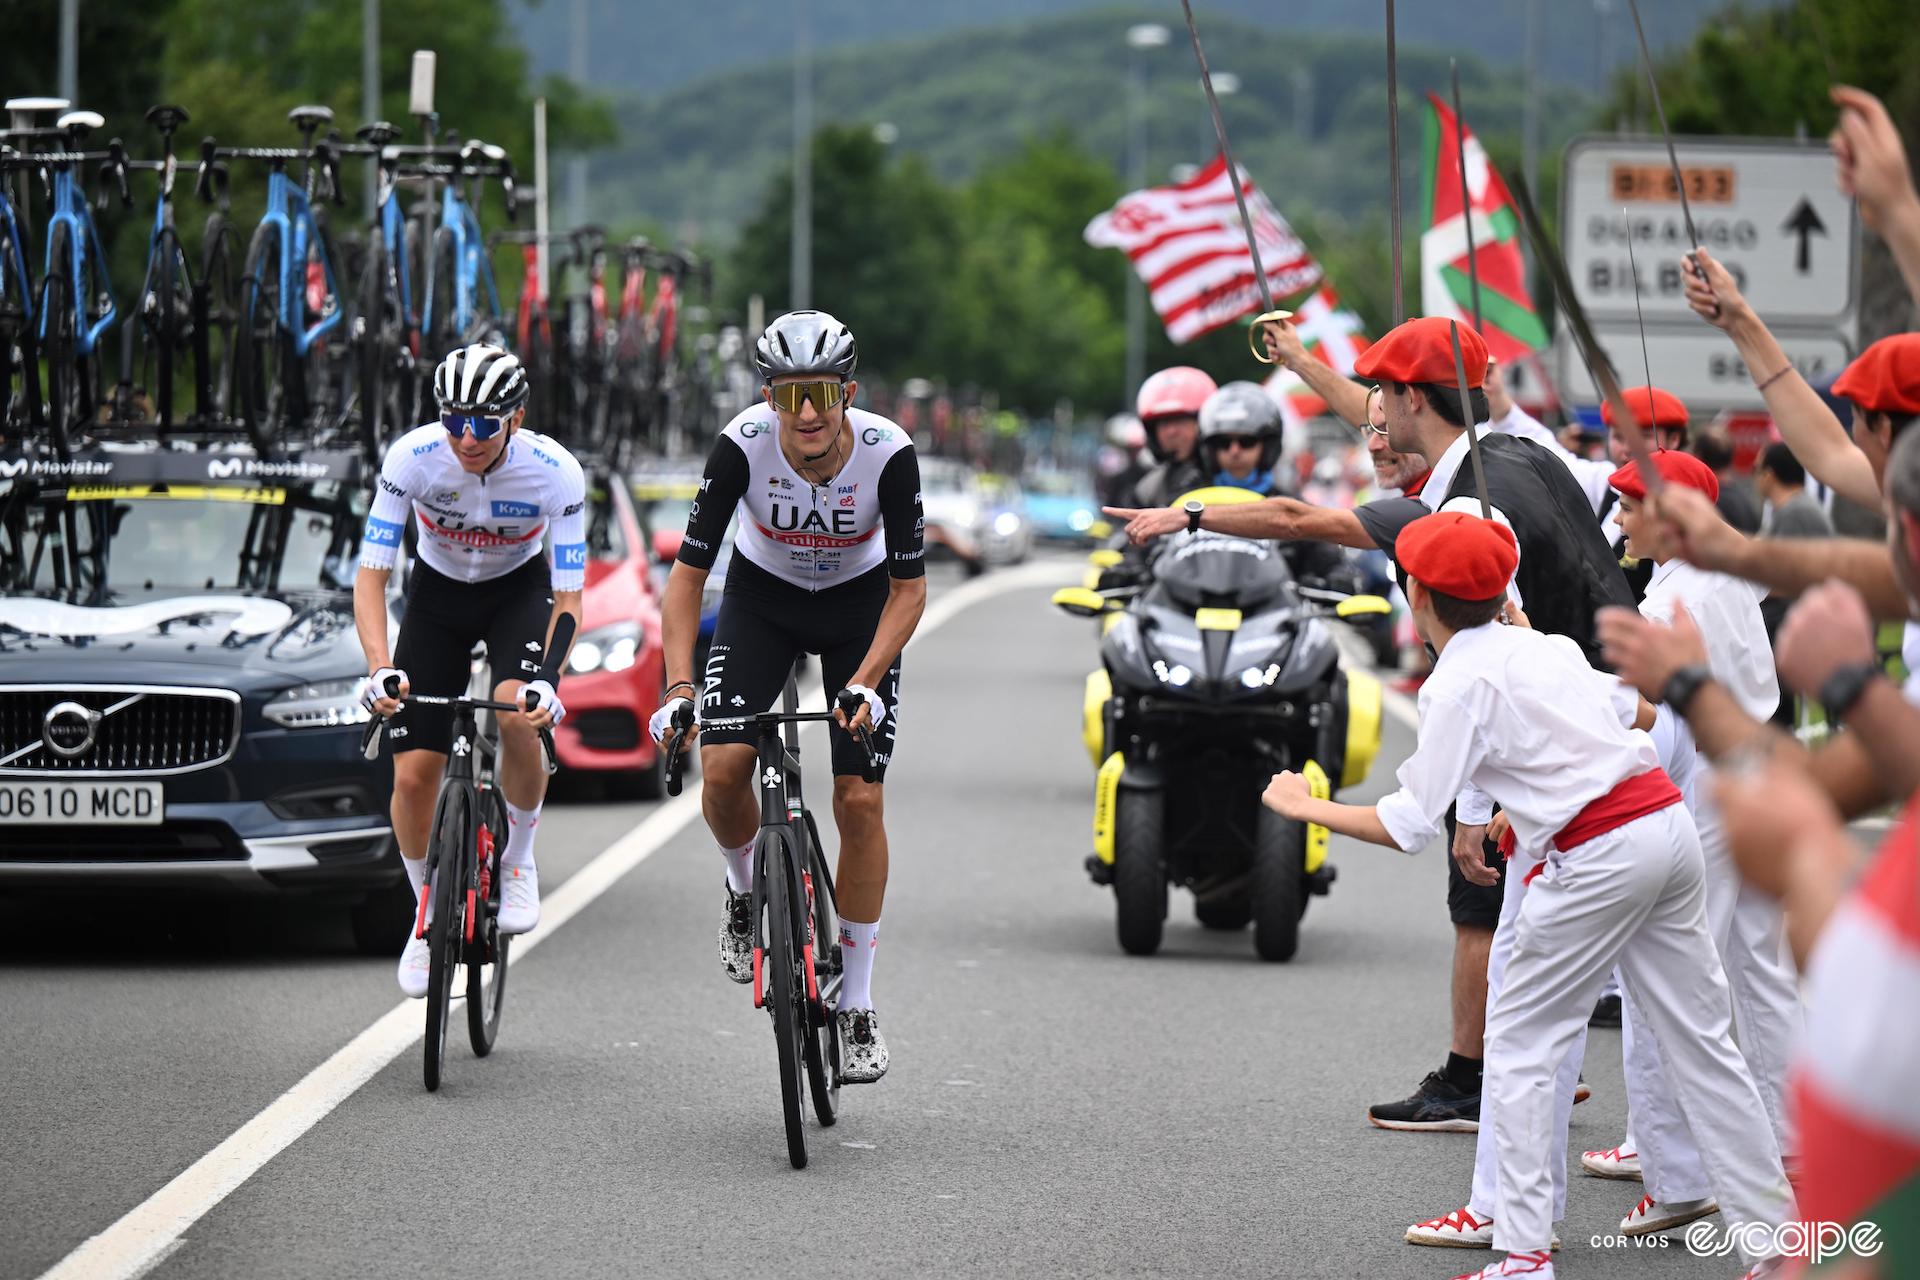 Dane Mikkel Bjerg rides in front and slightly to the right of his teammate, Tadej Pogačar, in an early stage at the Tour de France. Pogačar is in the white jersey of best young rider. The roadside is packed with Basque fans, including a number wearing the traditional txapela beret.